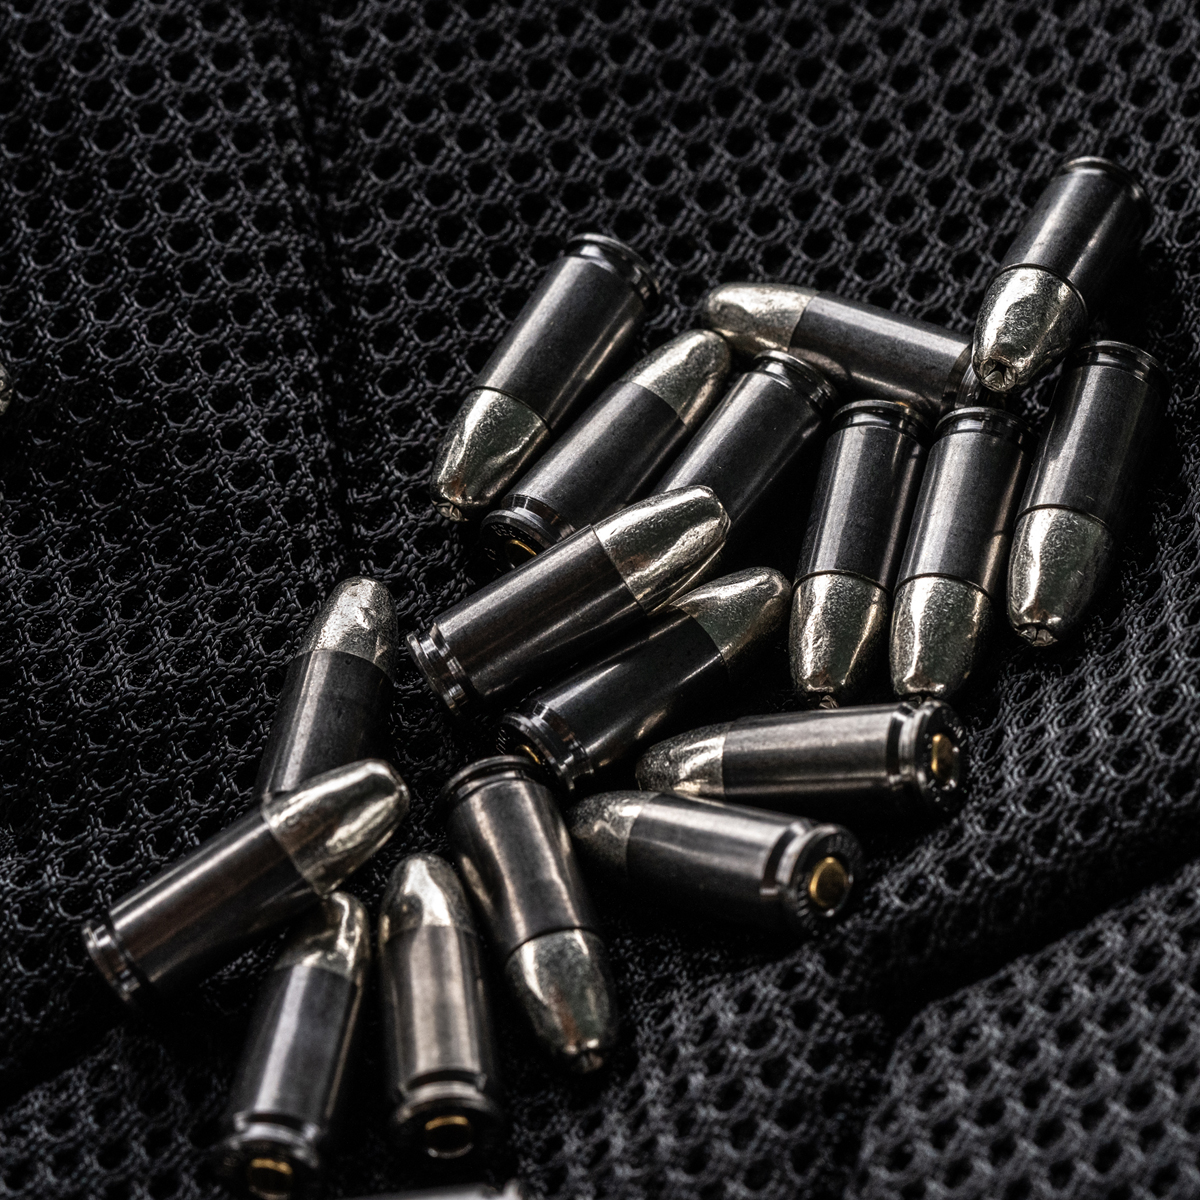 Norma MHP. Ready to load.

#norma #normaammo #ammo #ammunition #pewpew #pewpewlife #2ndamendment #2a #weaponsdaily #gunsdaily #firearmsdaily #rangeday #shootingrange #targetpractice #shootingpractice #selfdefense #everydaycarry #edc #concealcarry #firearms #handguns #pistol